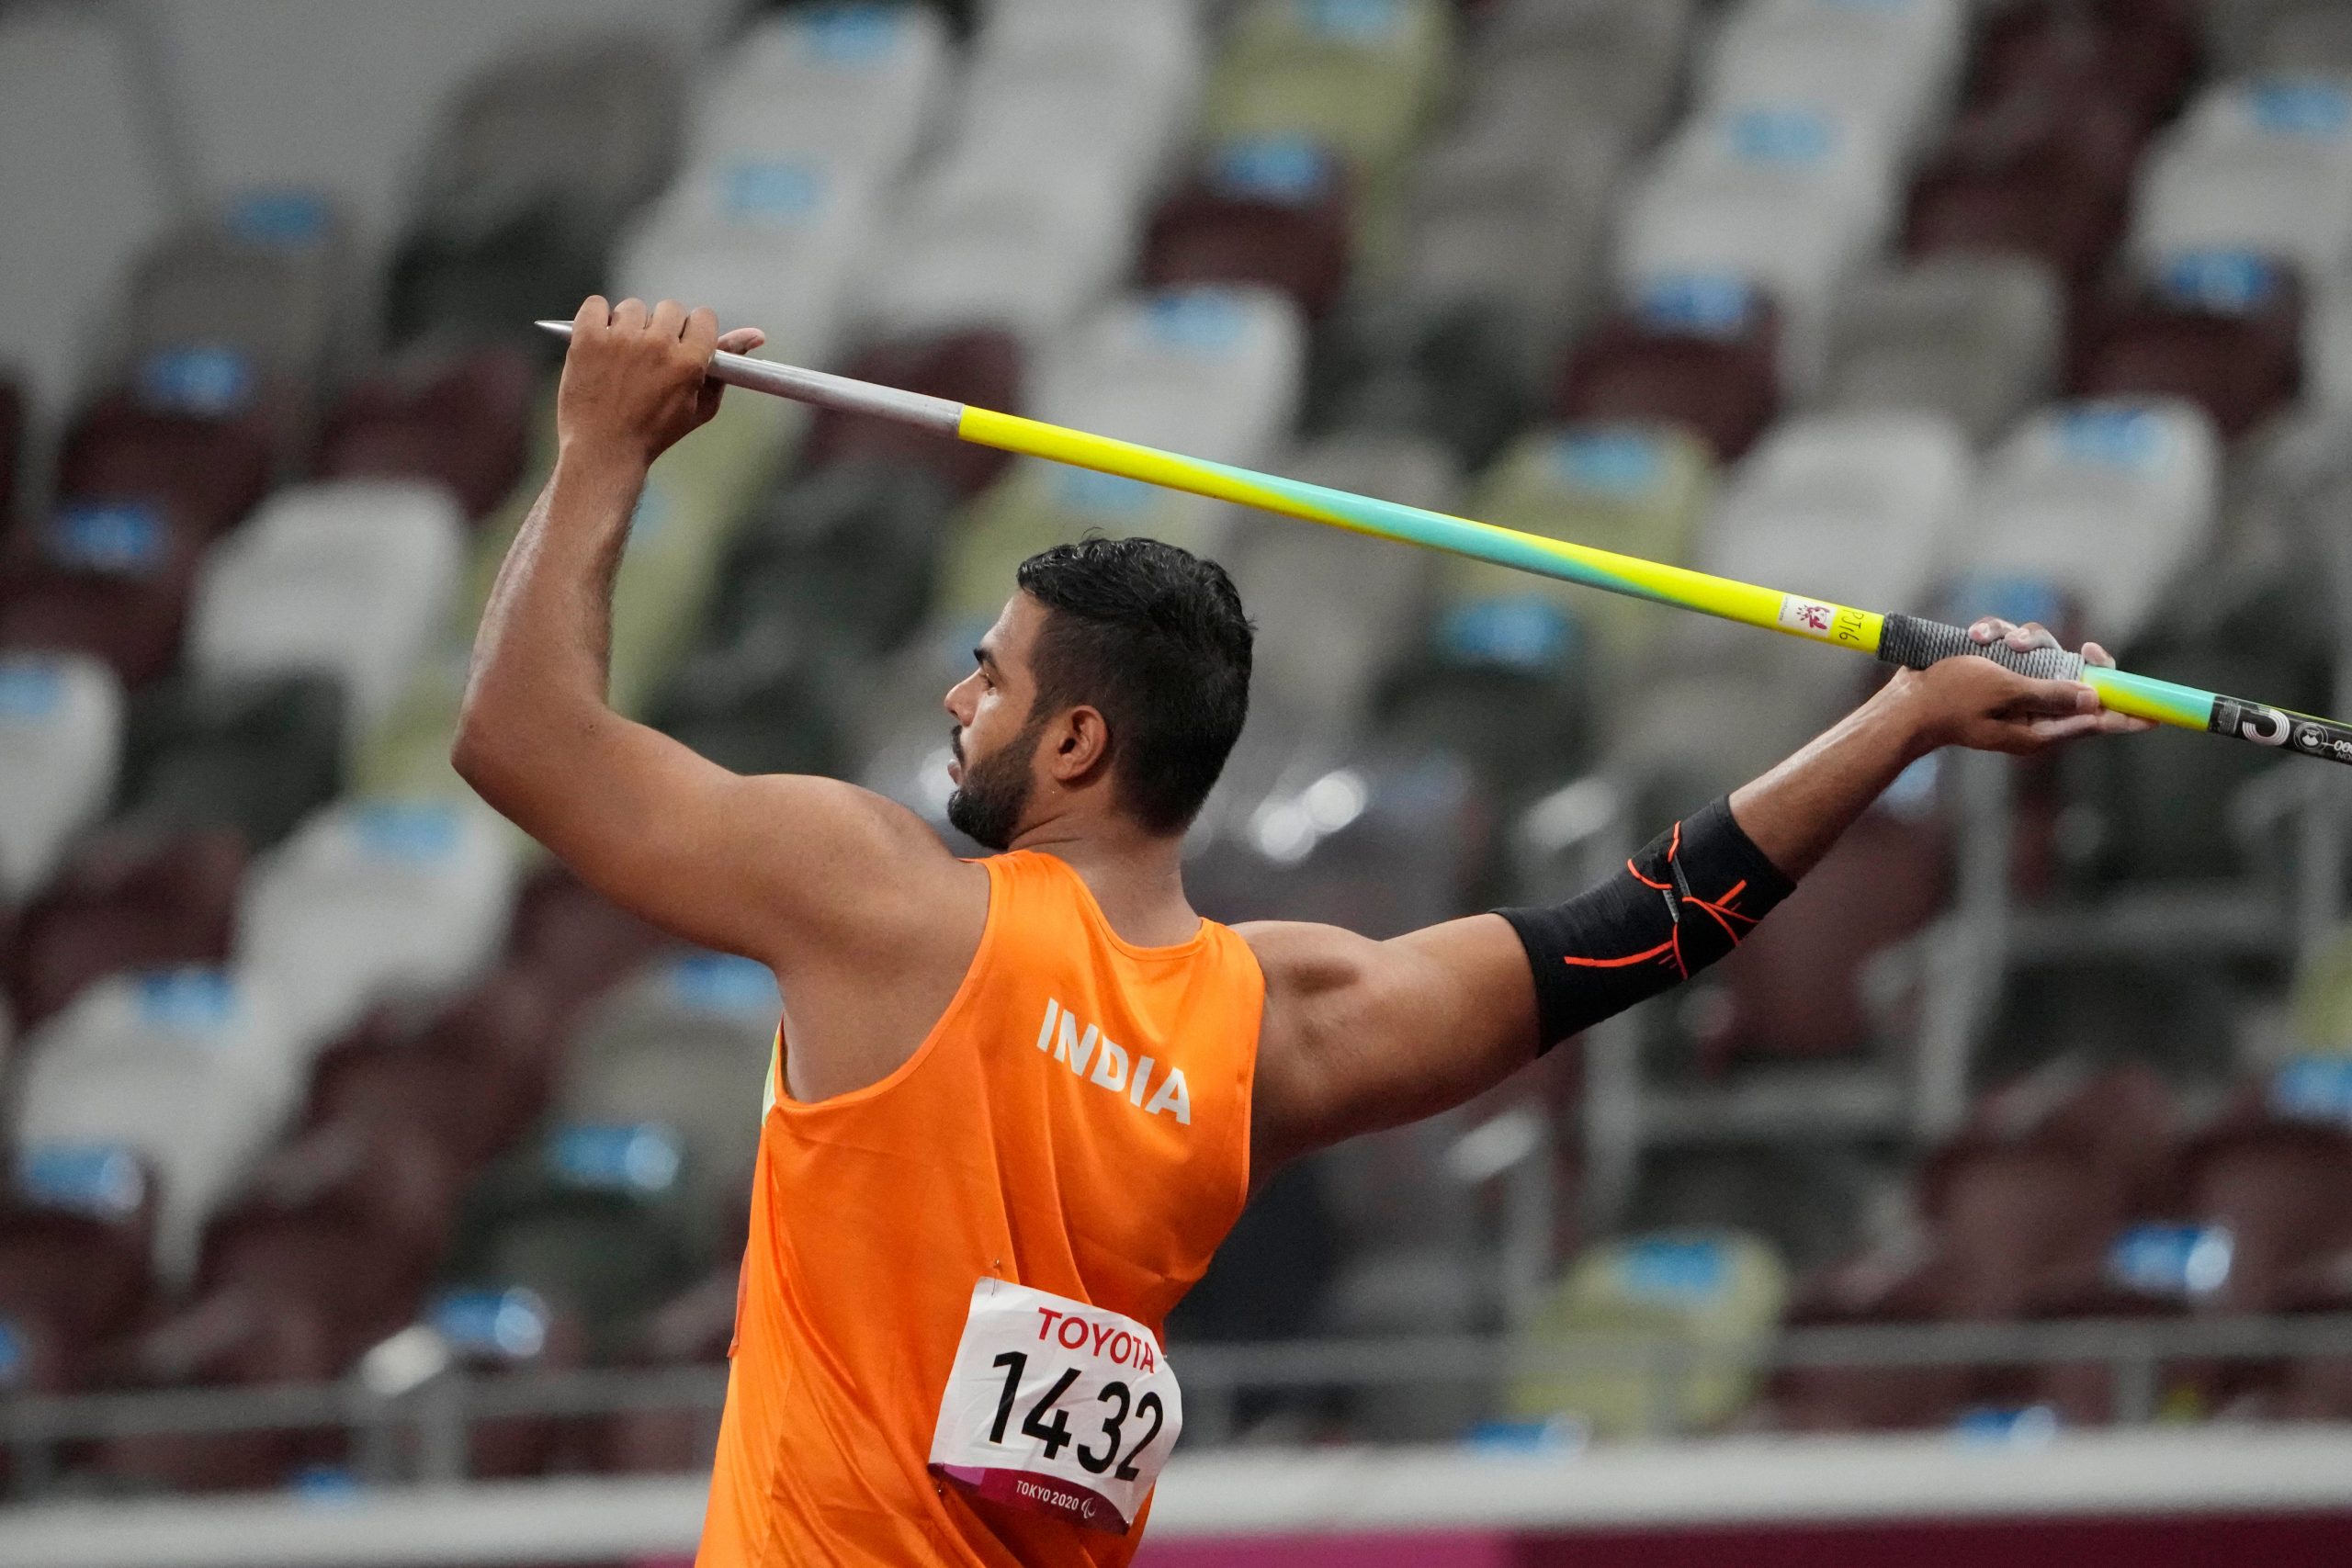 Watch| Family, friends celebrate para javelin thrower Sumit Antil’s Paralympics gold